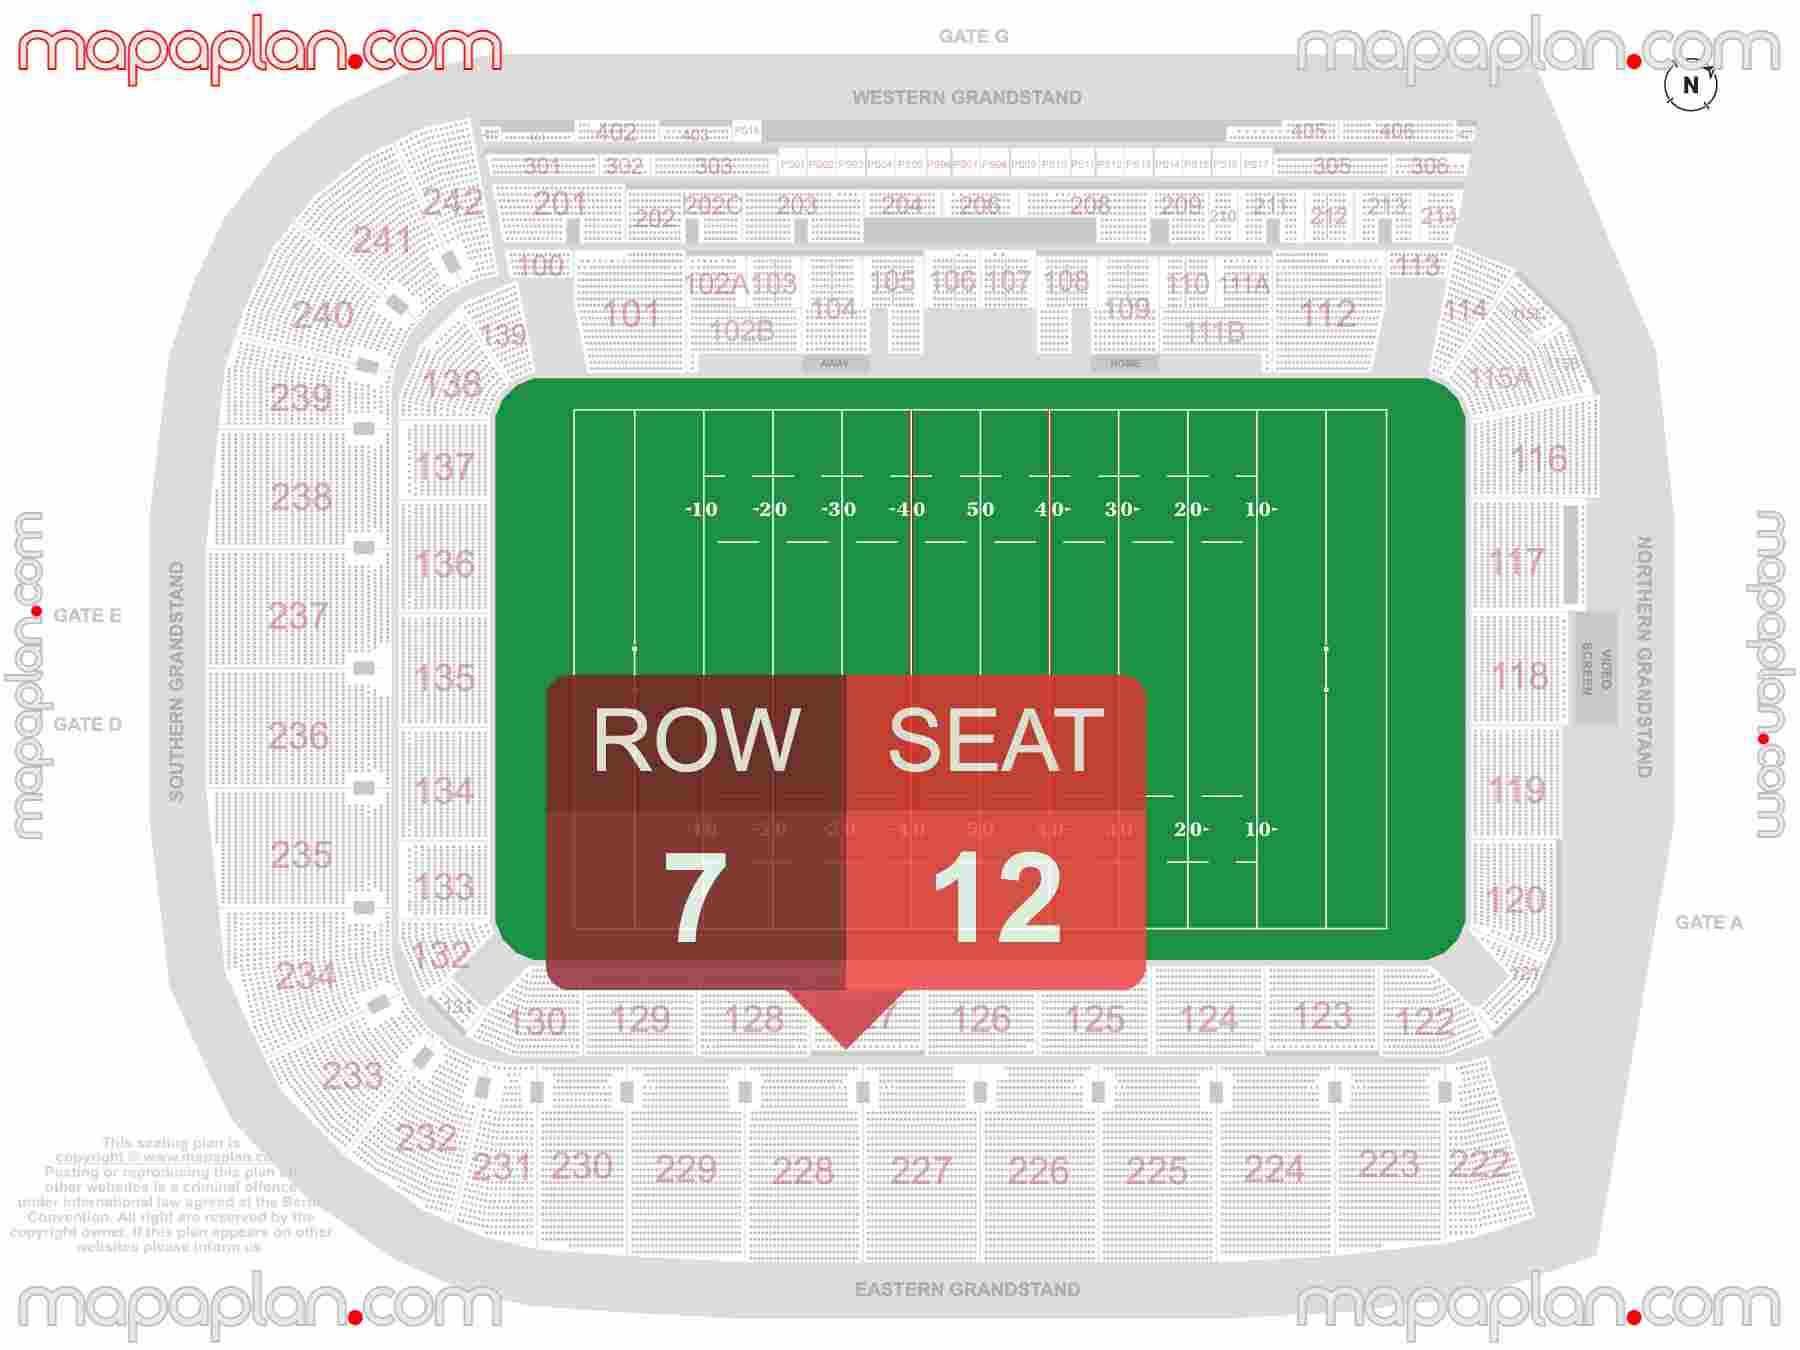 Queensland Country Bank Stadium seating map Rugby, football, soccer inside capacity view arrangement plan - Interactive virtual 3d best seats & rows detailed stadium image configuration layout